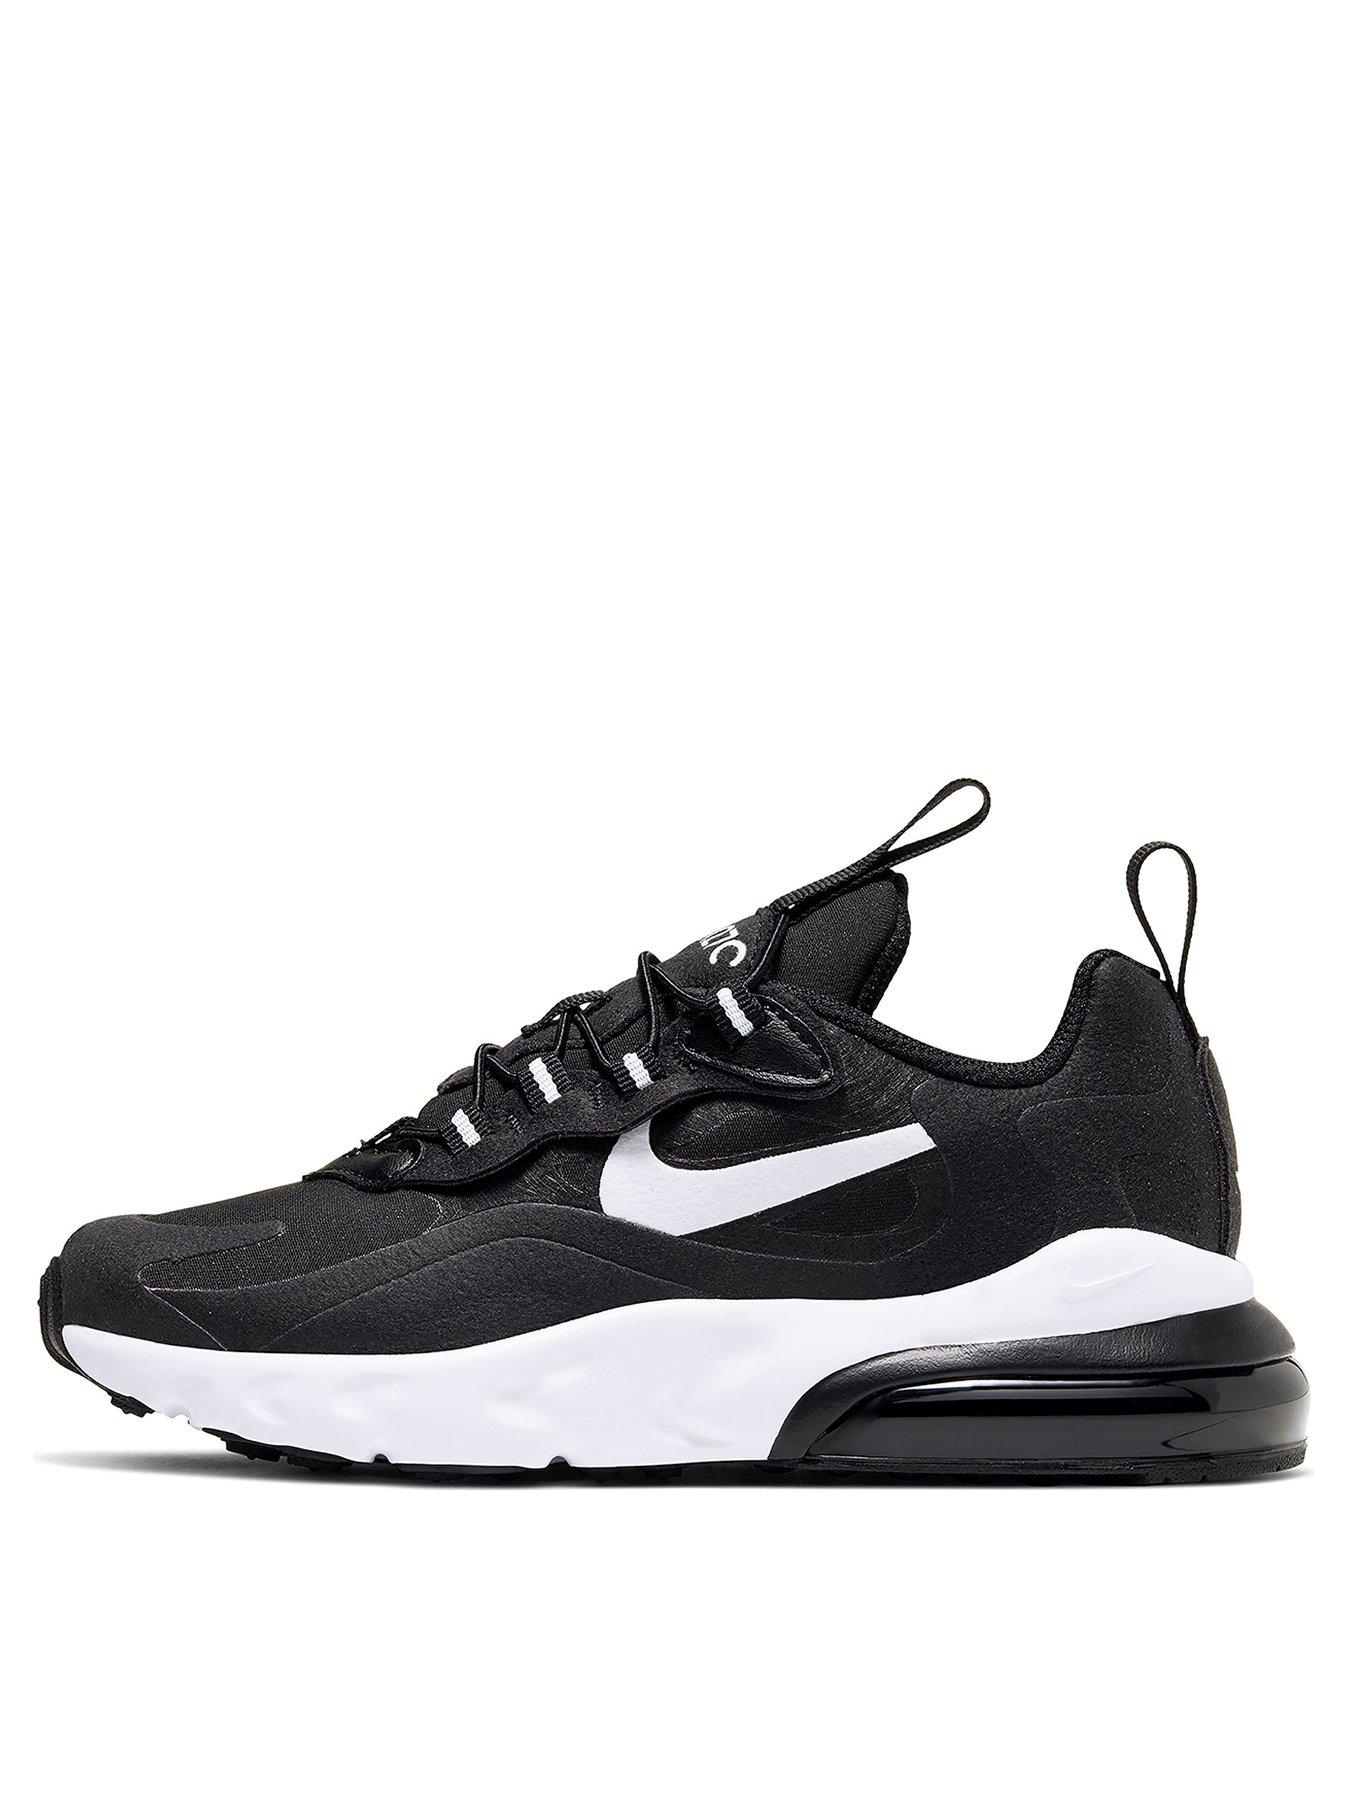 Nike Air Max 270 React Childrens Trainers - Black/White | very.co.uk